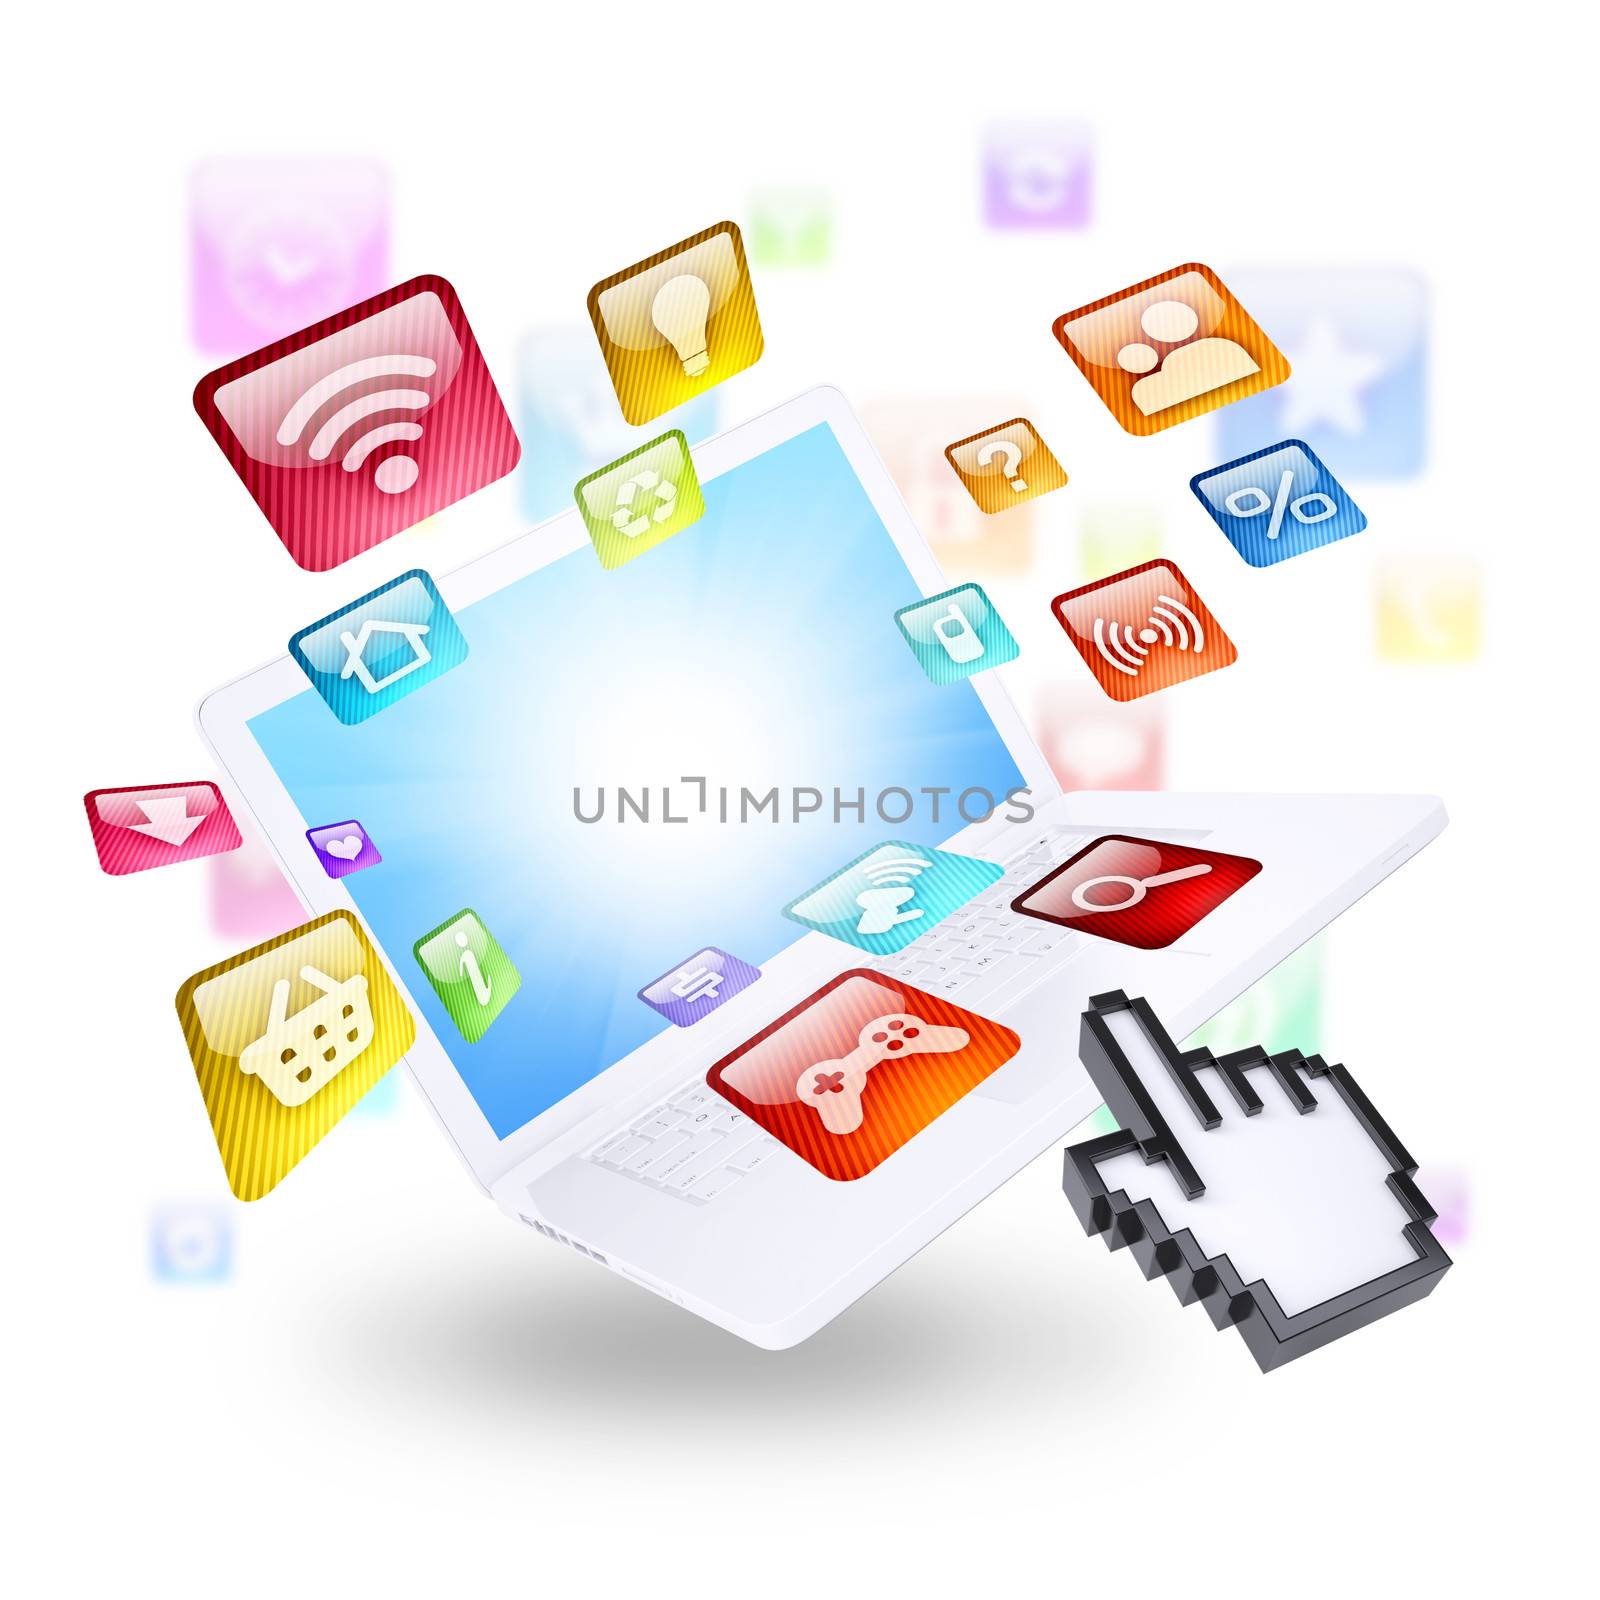 Laptop and application icons by cherezoff